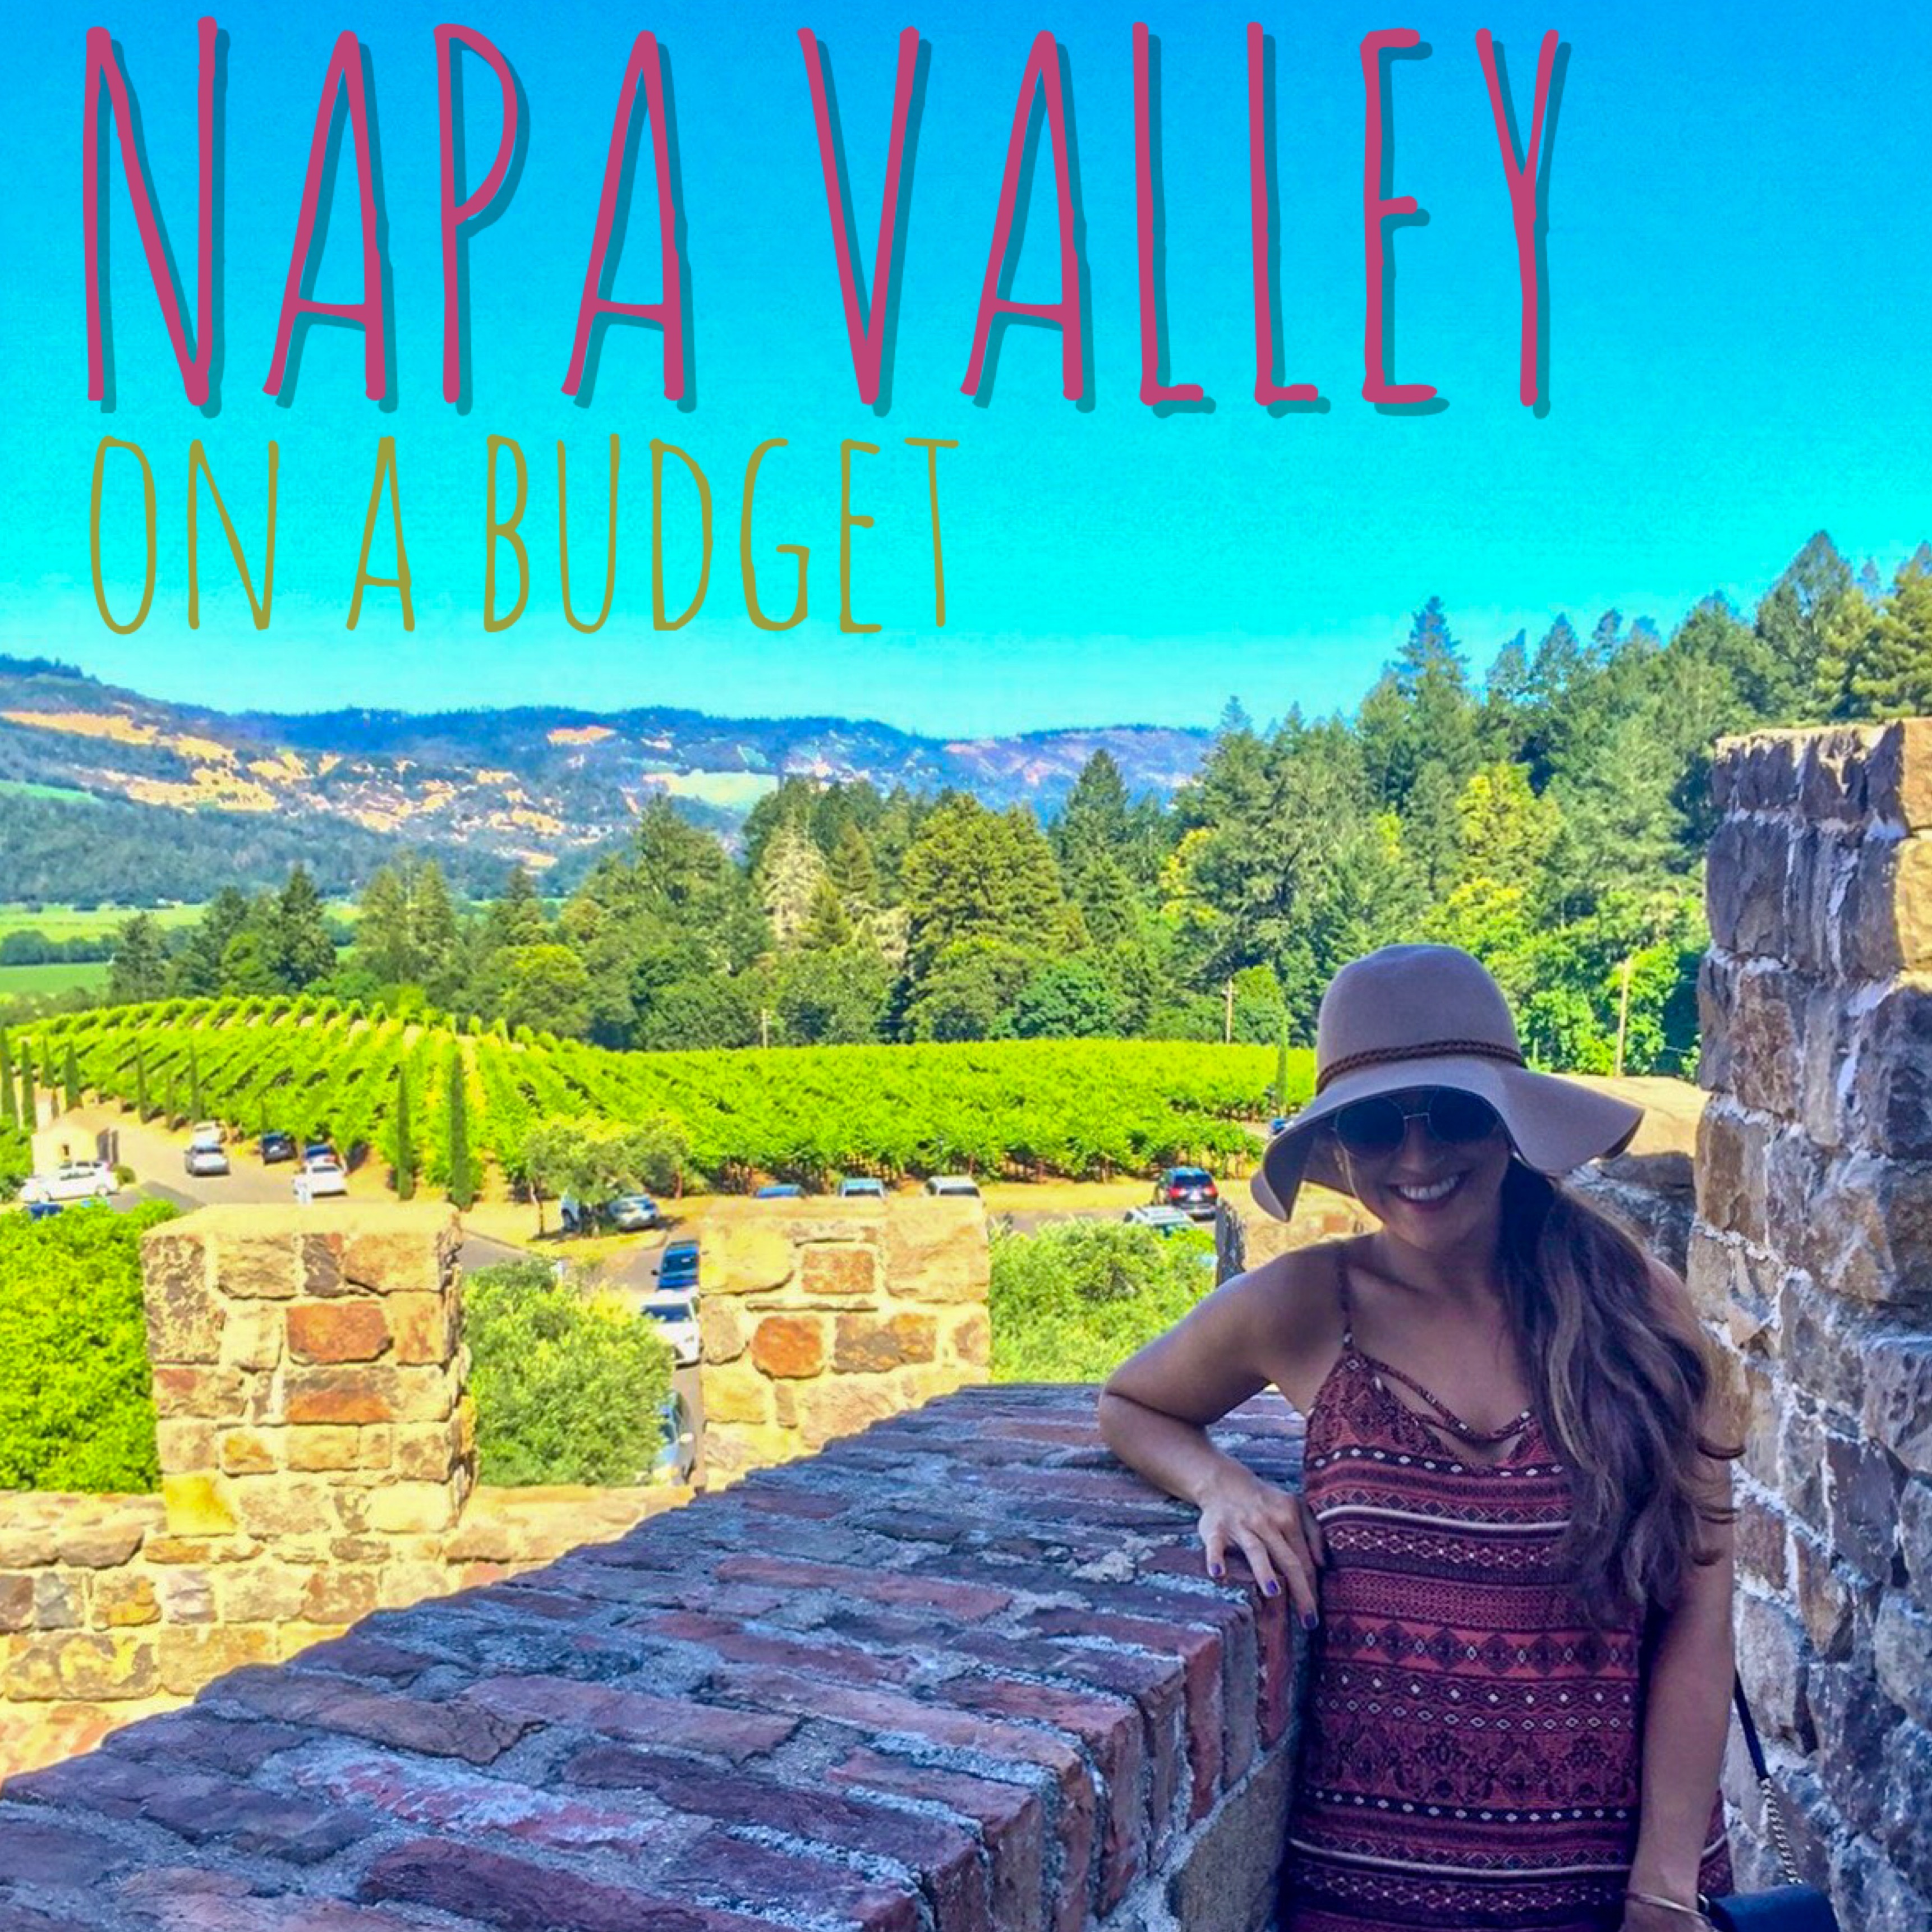 Napa Valley, California Road Trip-On A Budget!